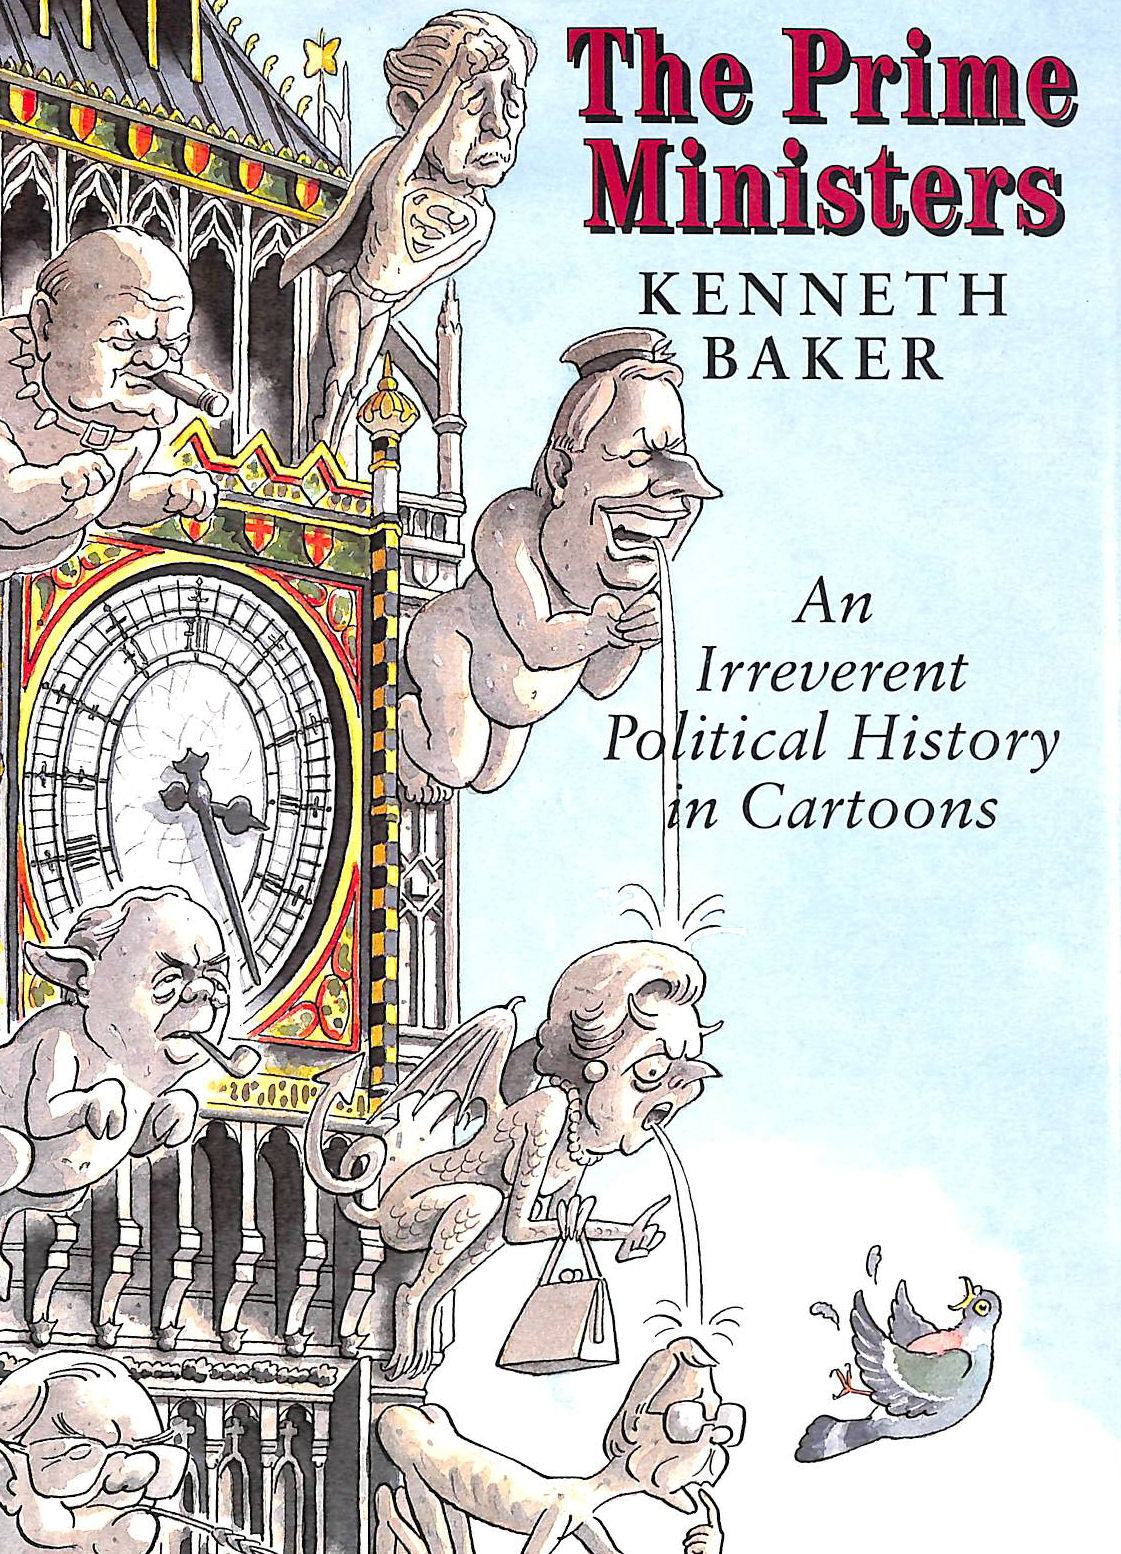 BAKER, KENNETH - Prime Ministers, The:An Irreverent Political History in Cartoons: An Irreverent Political History in Cartoons